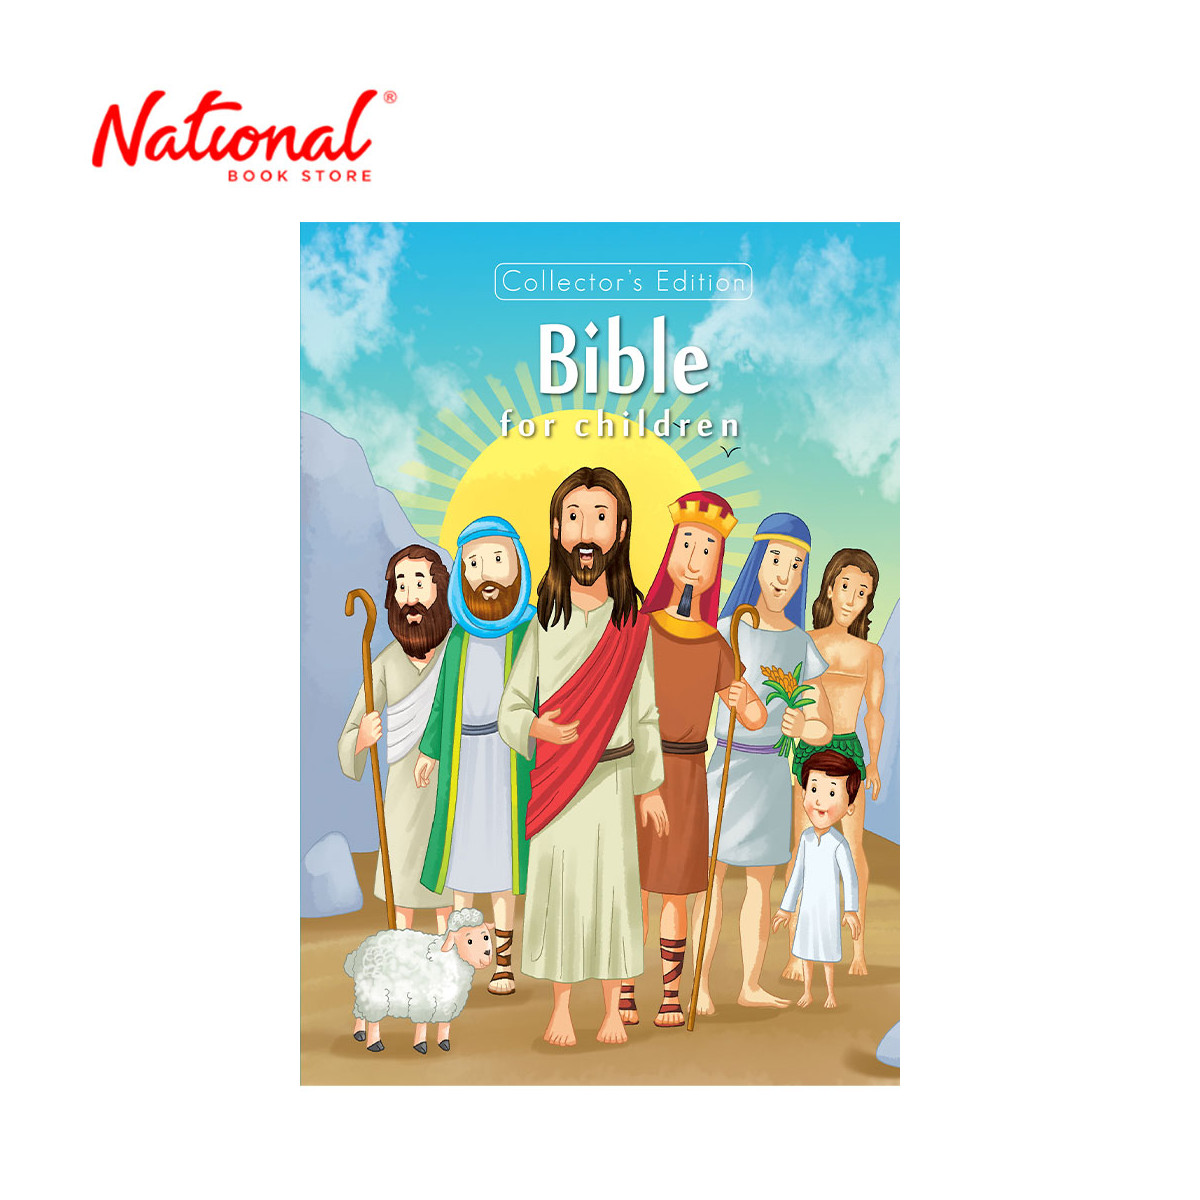 Bible For Children (Collector's Edition) - Hardcover - Bible Stories for Kids